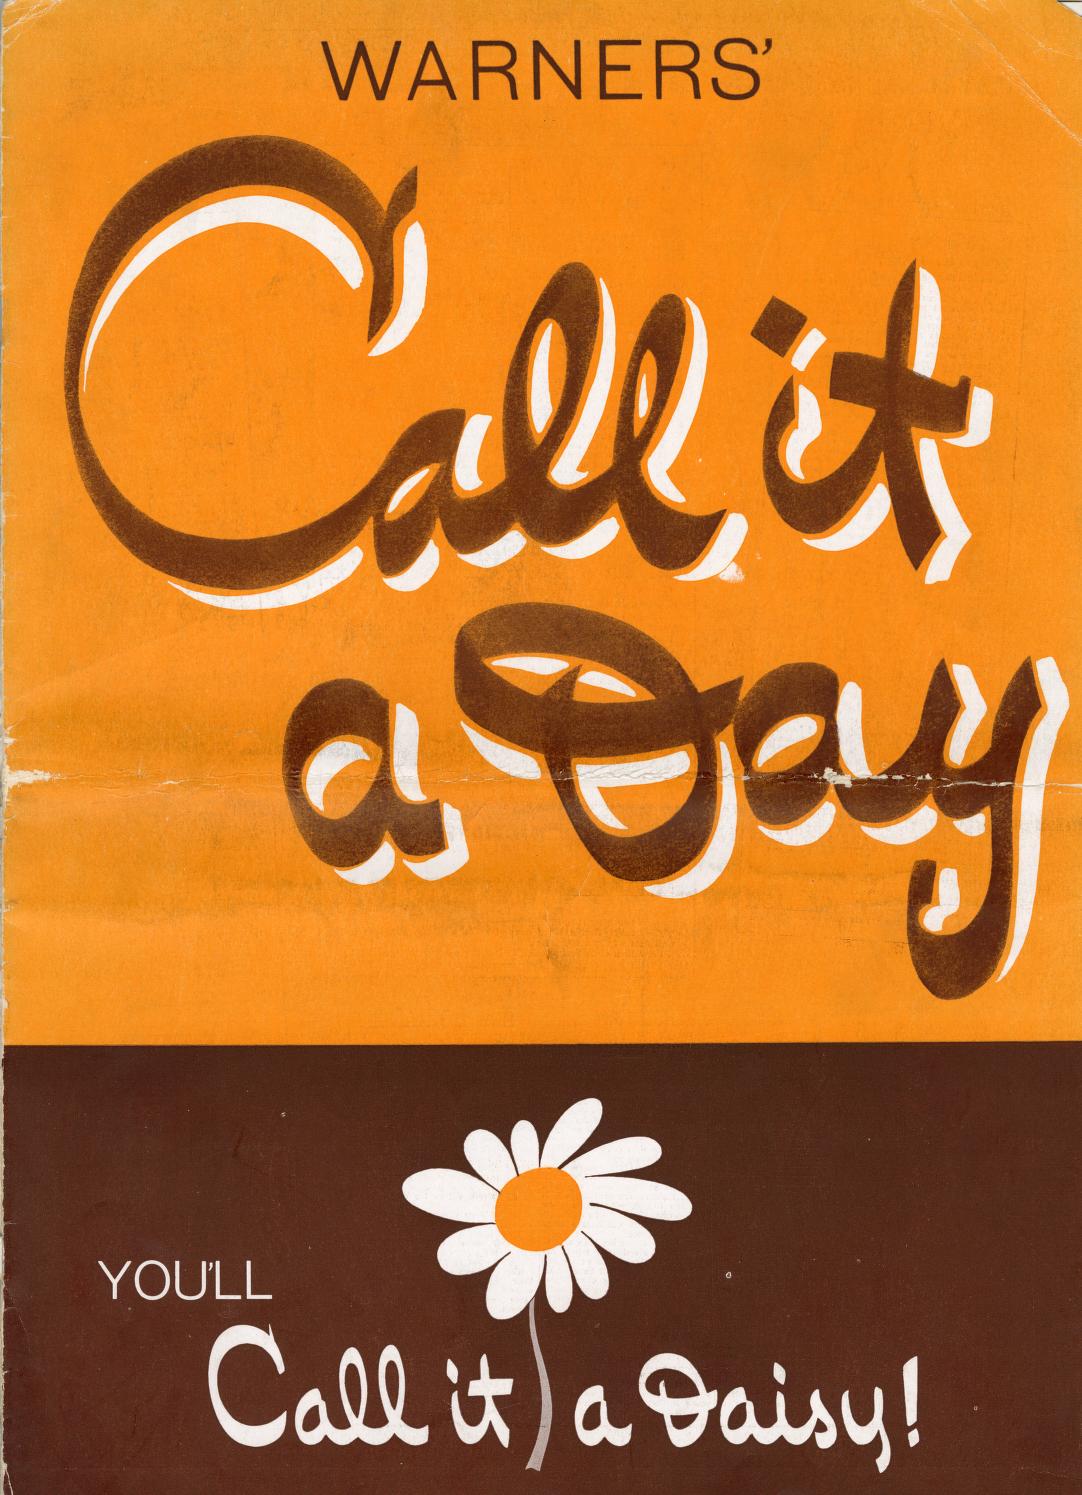 Call It a Day (Warner Bros.)